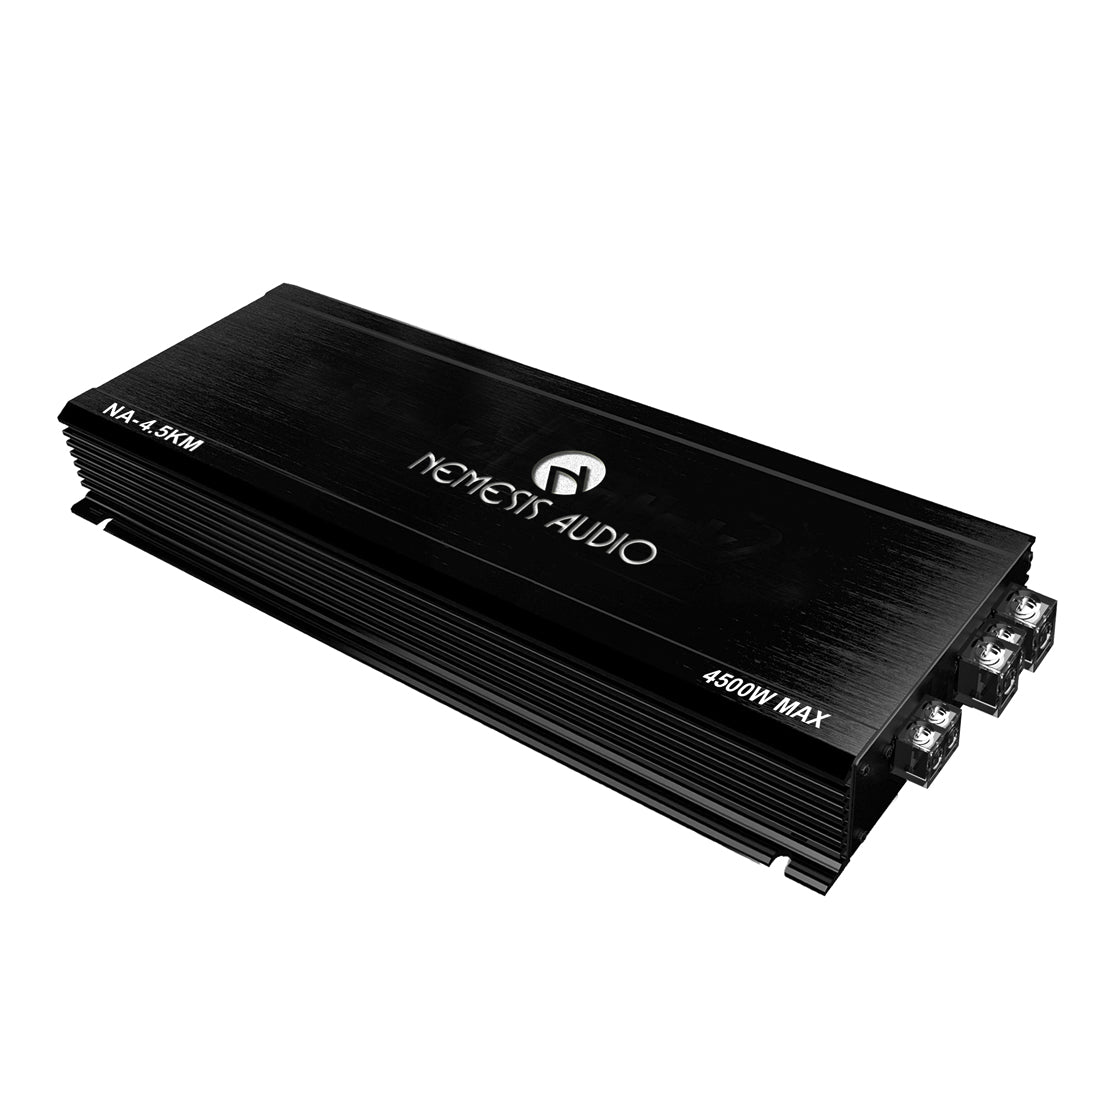 Nemesis Audio NA-4.5KM 4500 W Car audio stereo receiver Power integrated amp amplifier 1-CH / Monoblock Car Stereo Amplifier